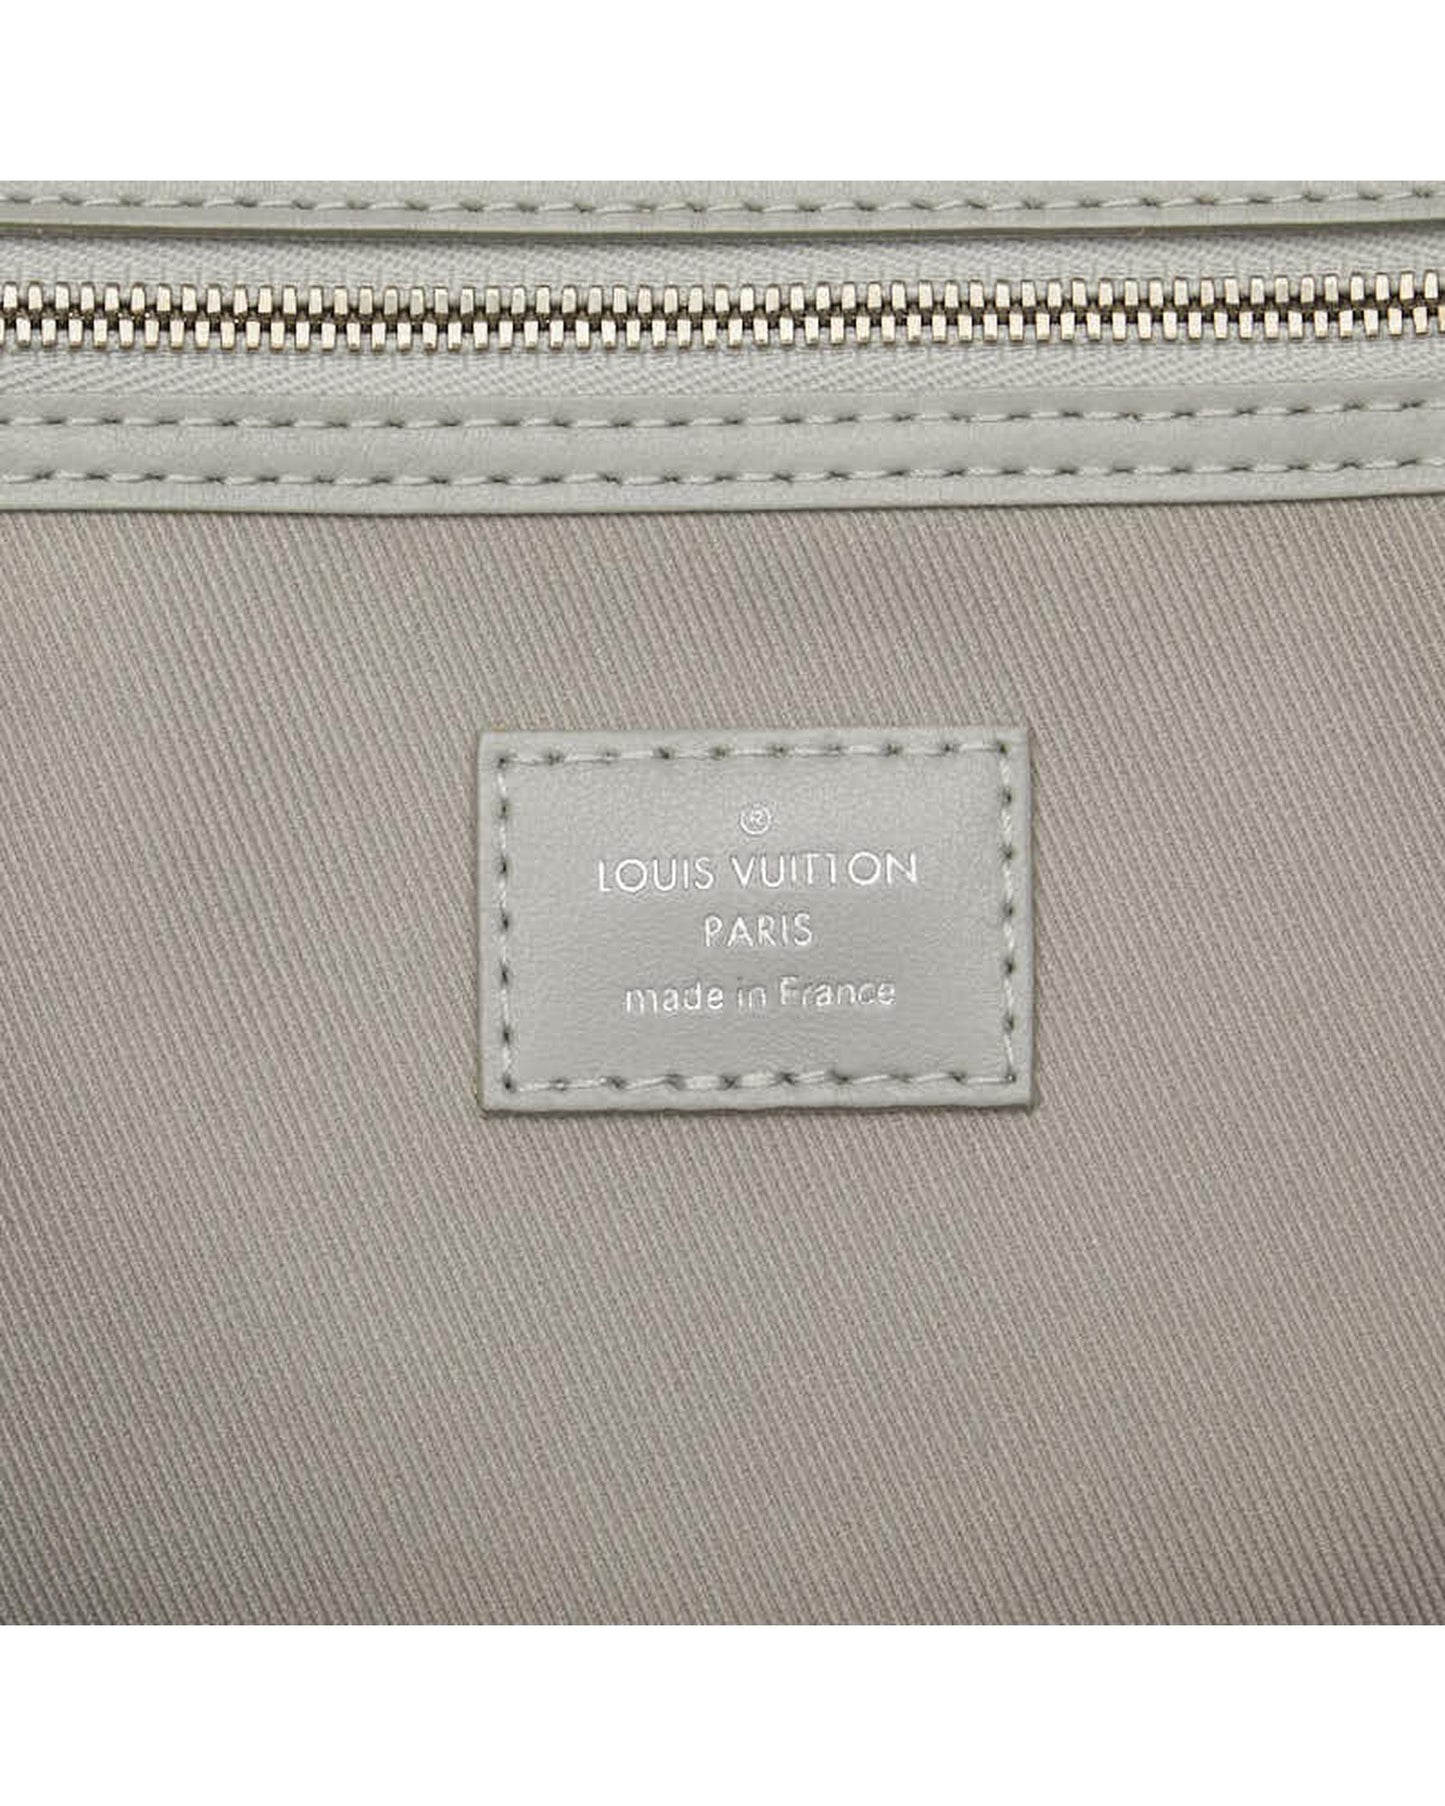 Louis Vuitton Women's Monogram Keepall Bag in Excellent Condition in White